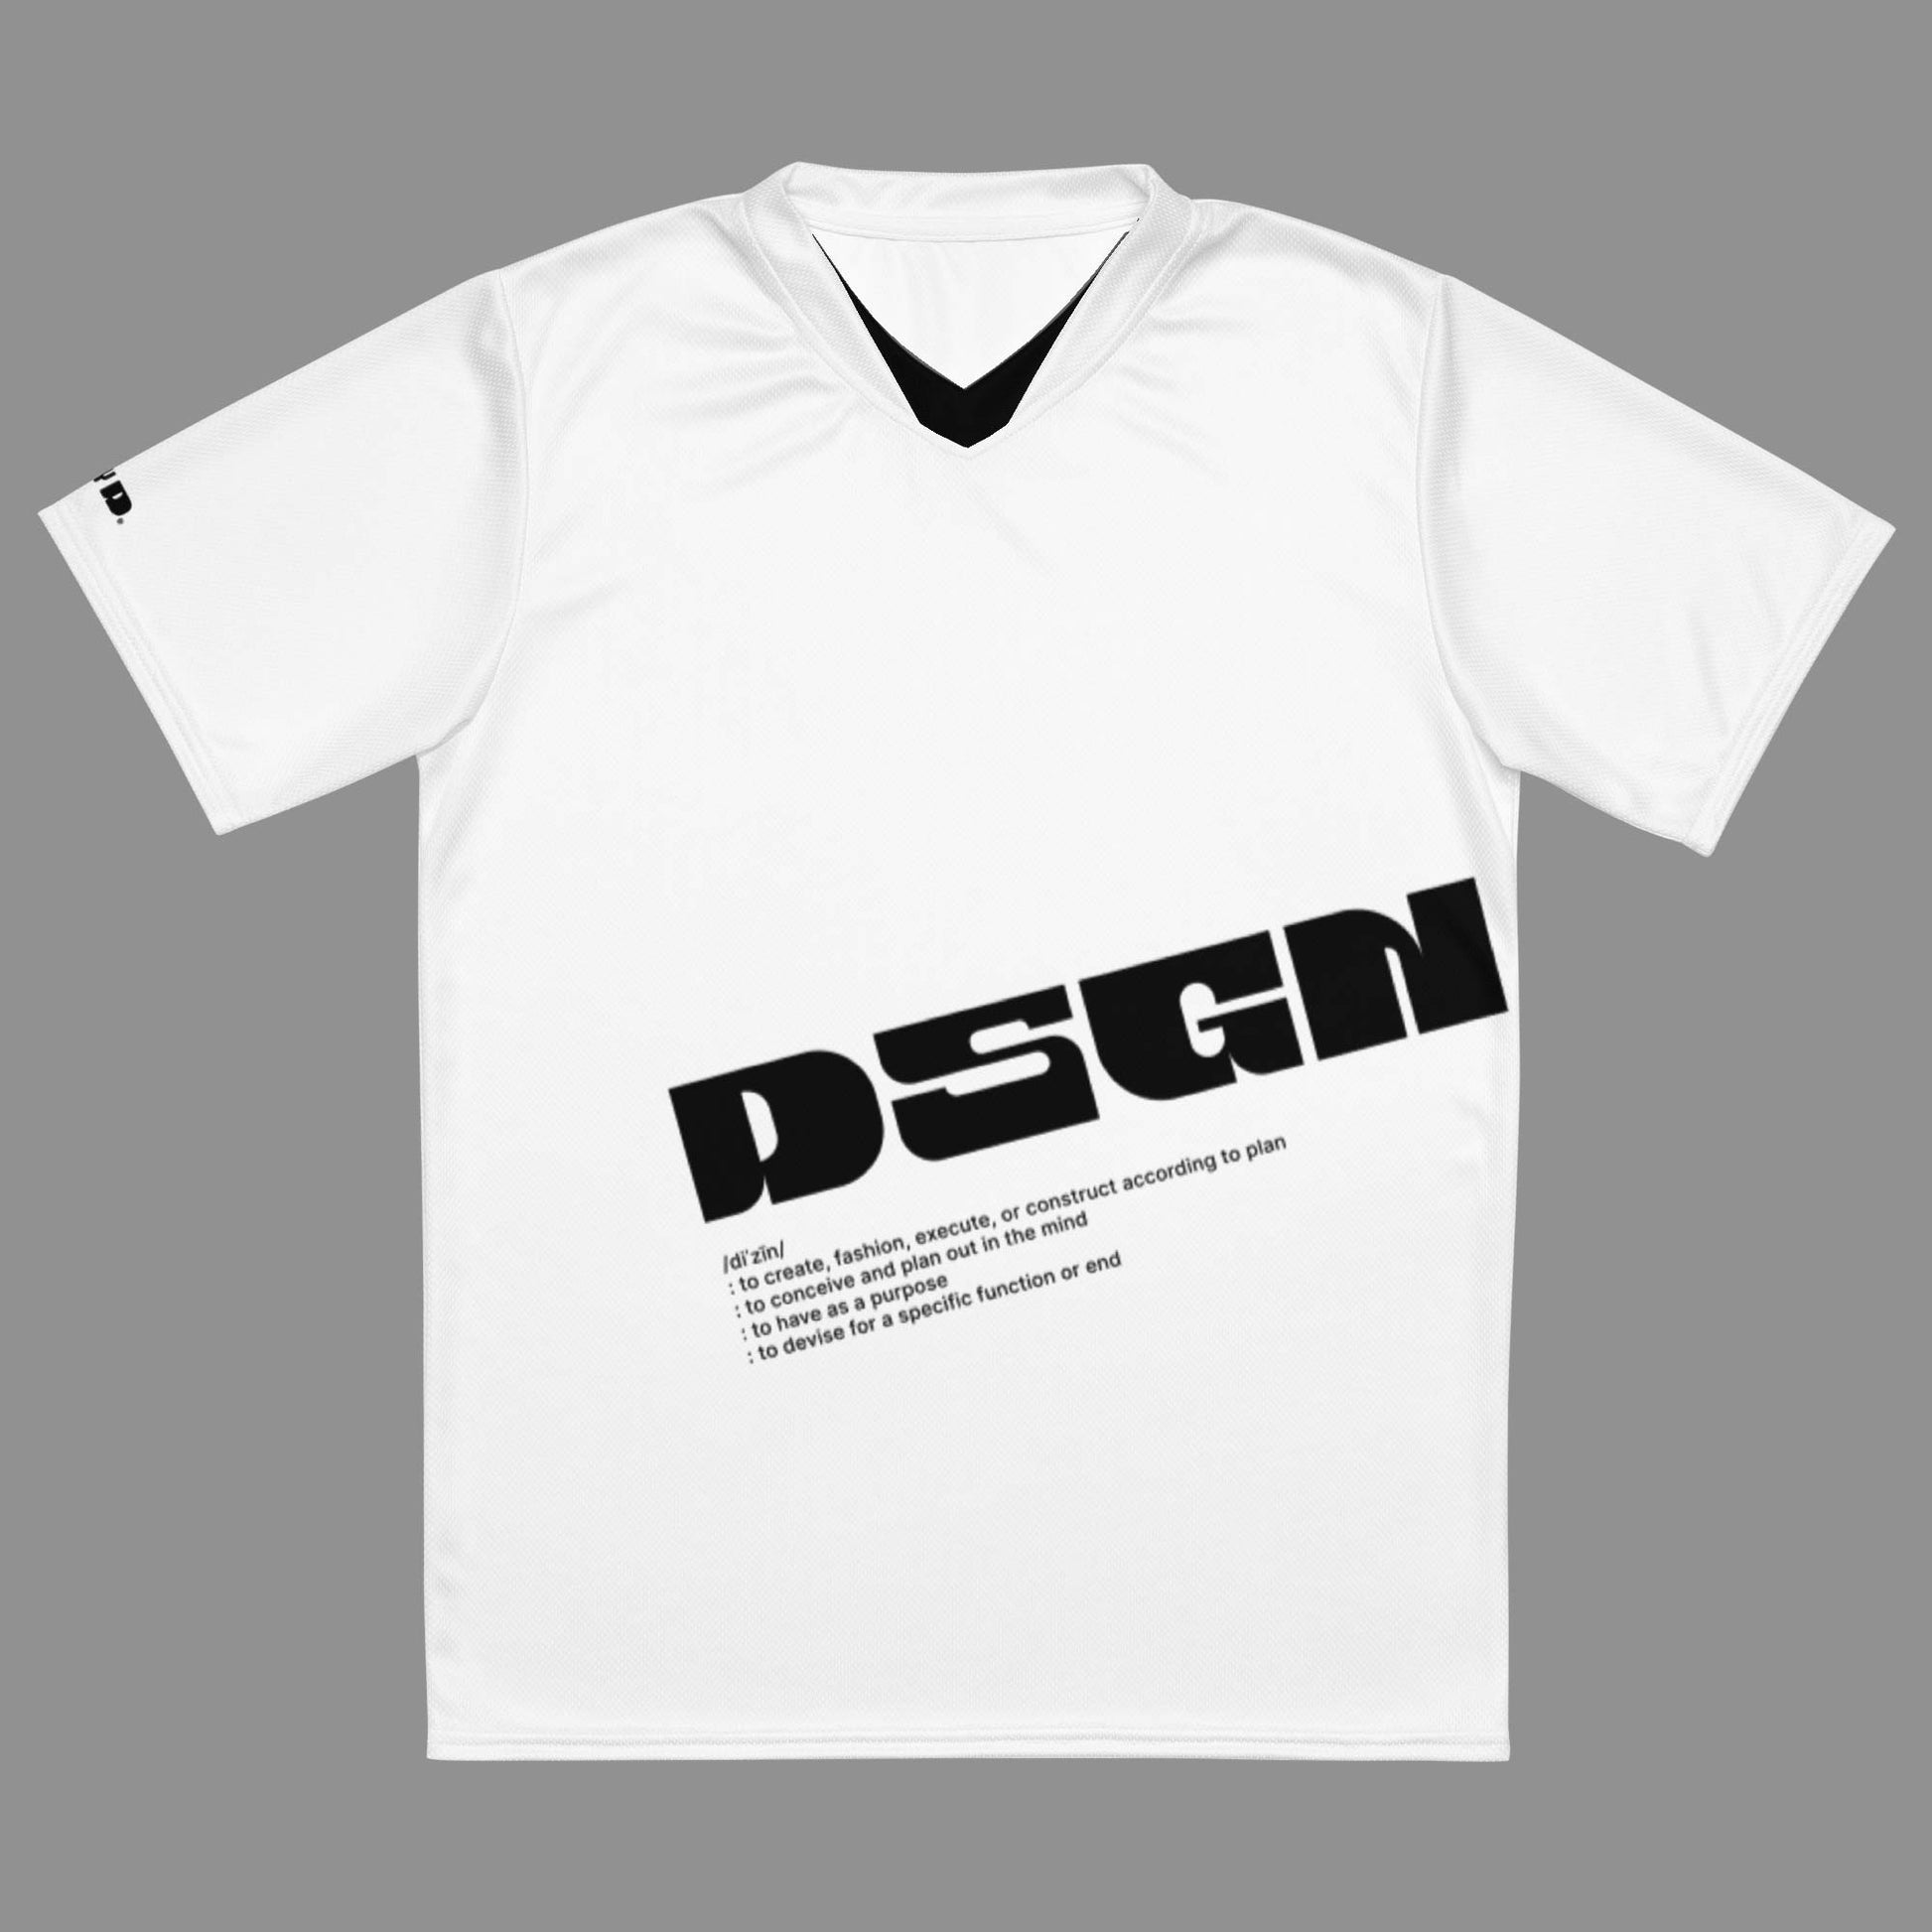 White sports jersey with "DSGN" printed on the jersey. 